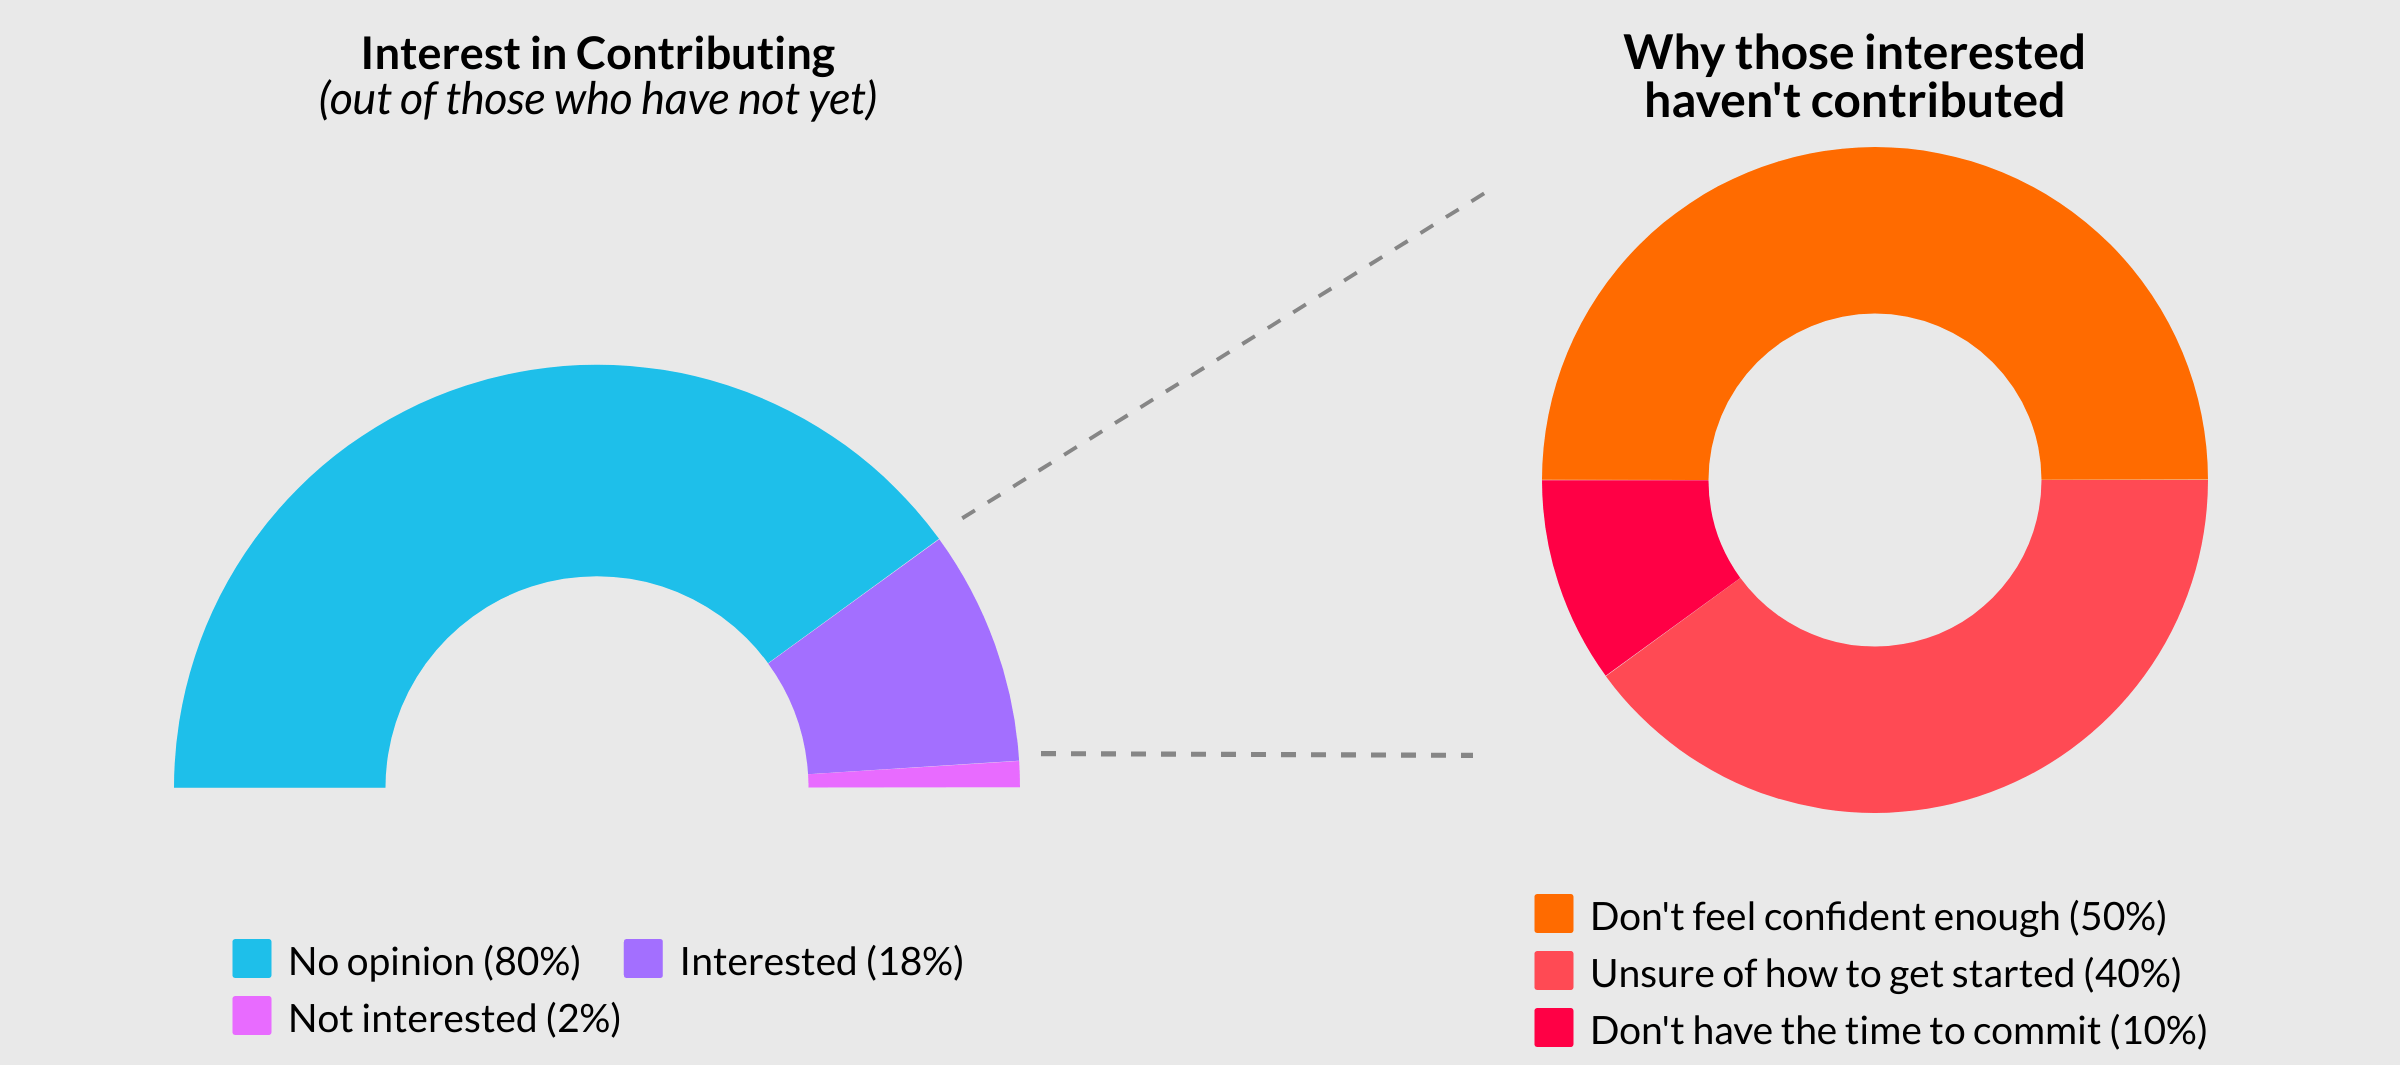 Visualisation showing interest in contributing to open source and why those who are interested did not contribute